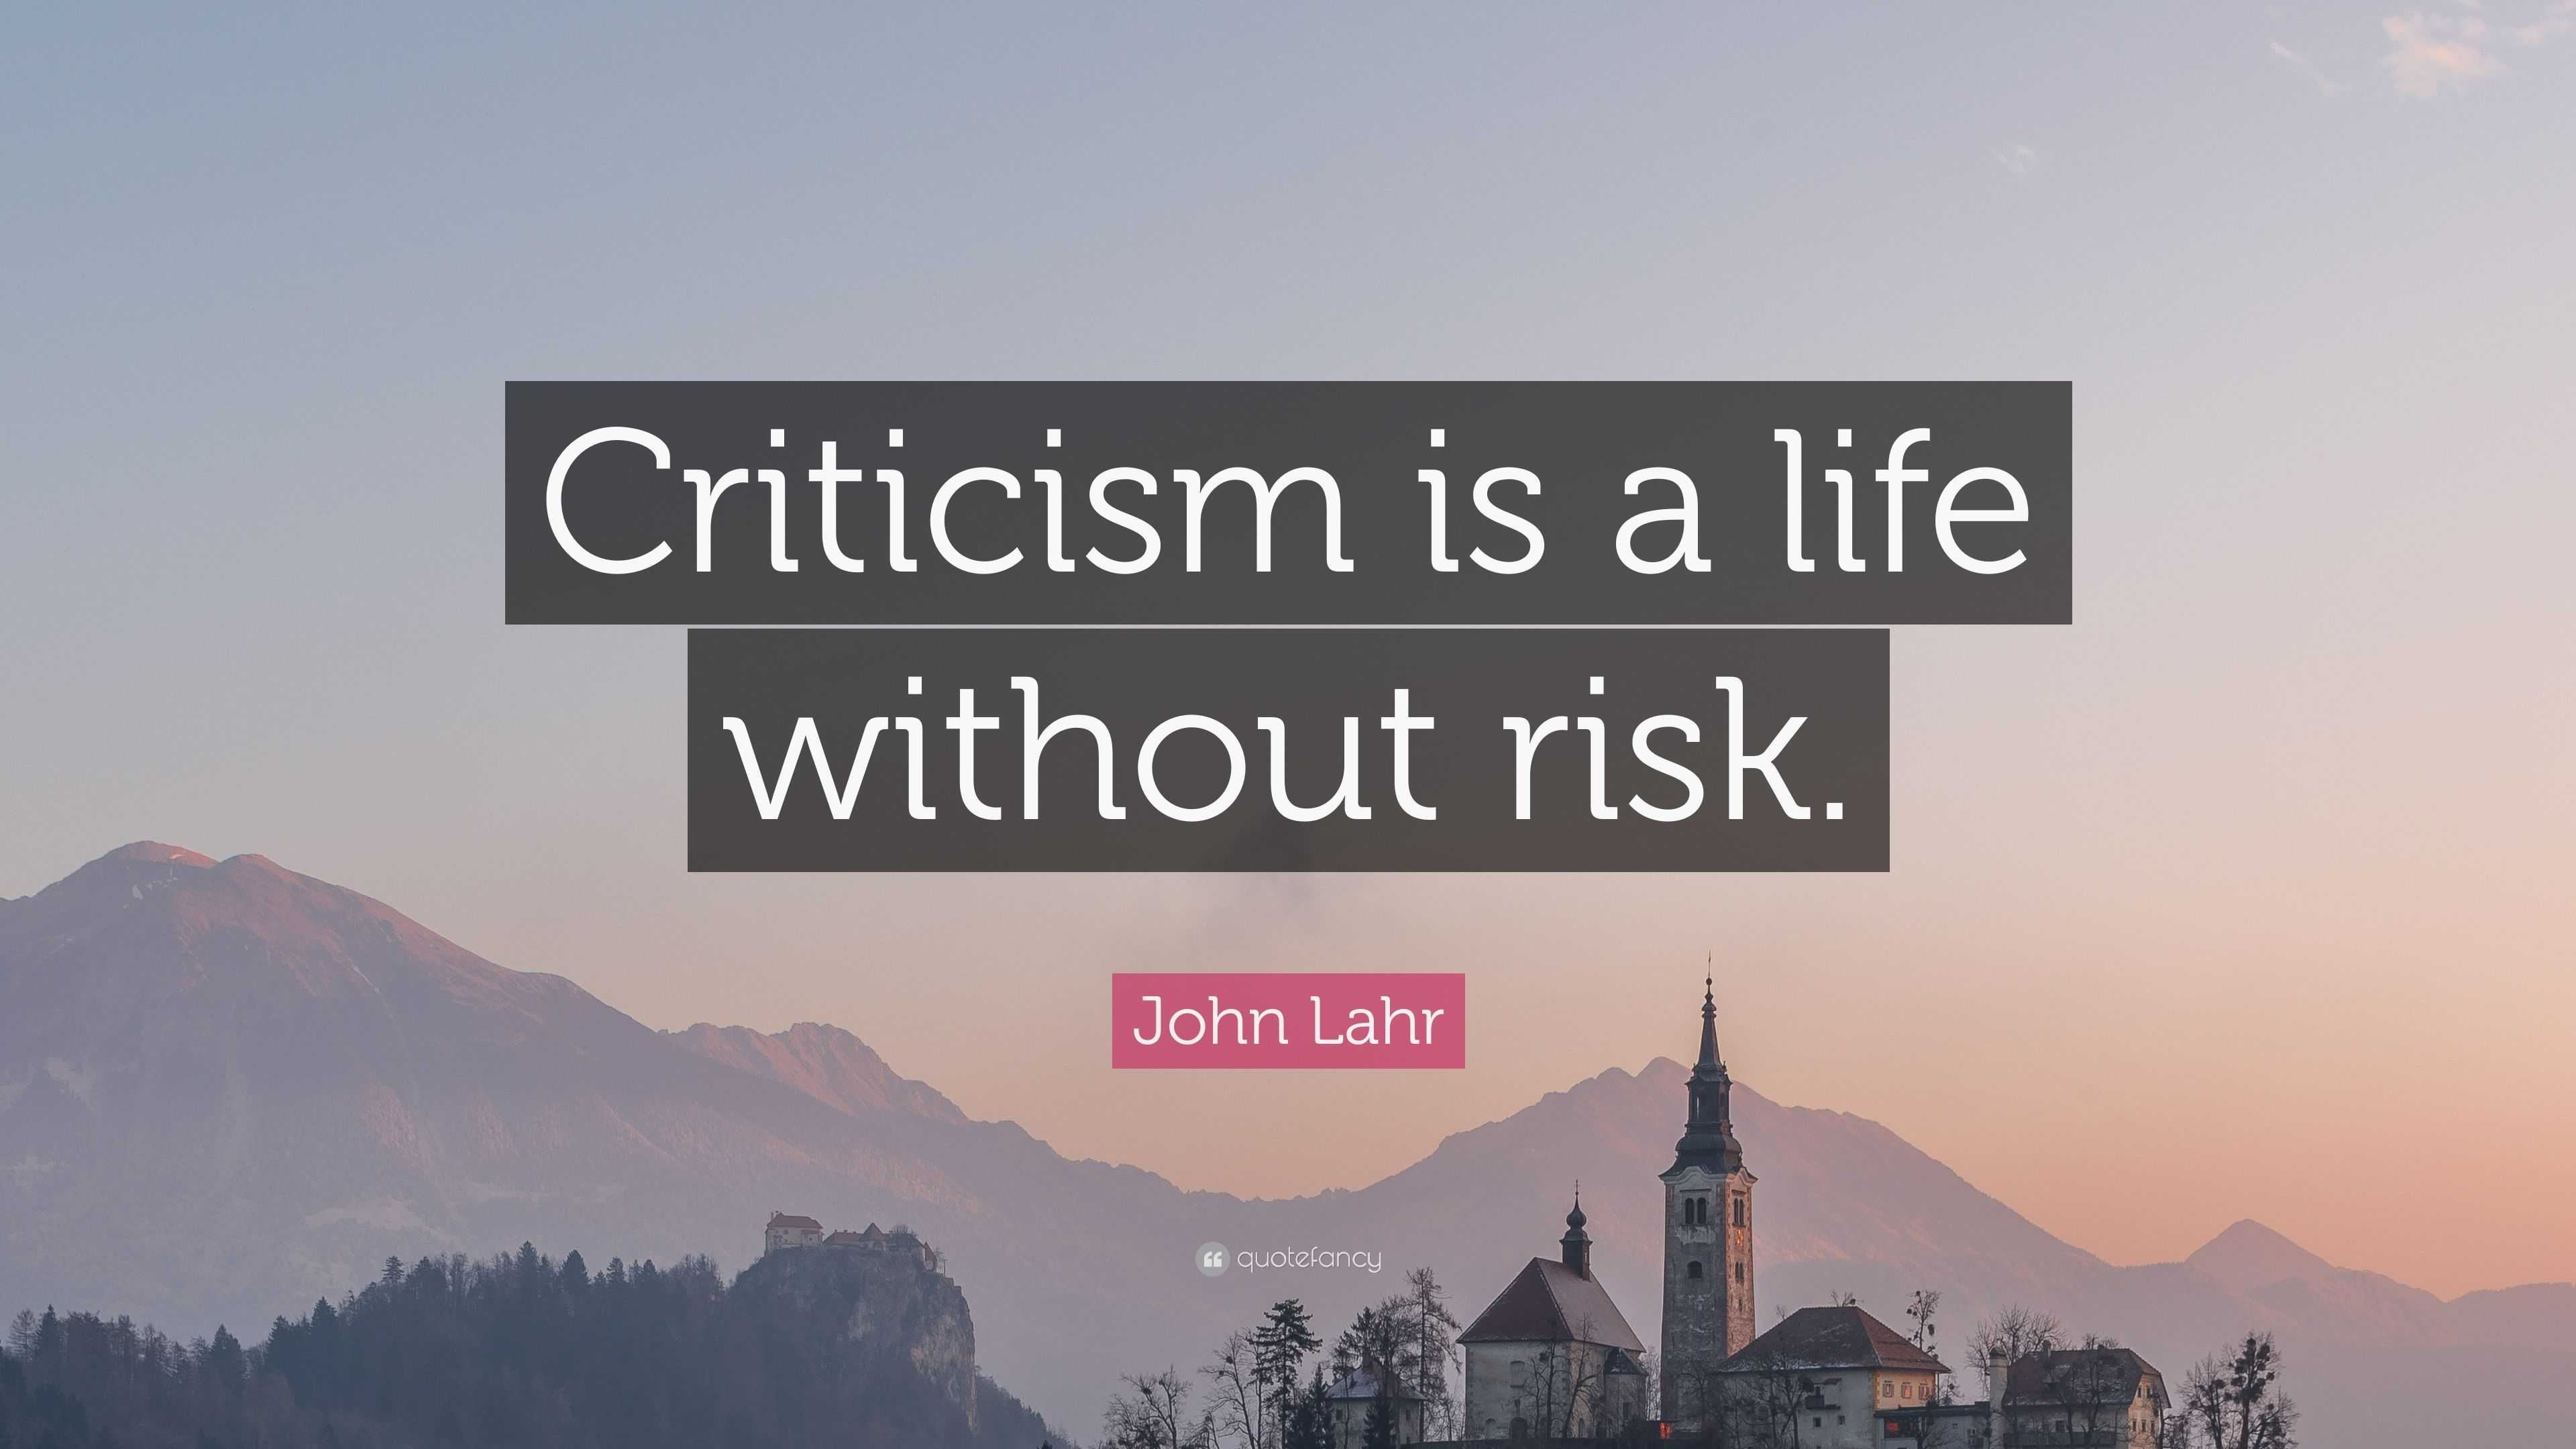 John Lahr Quote “Criticism is a life without risk ”